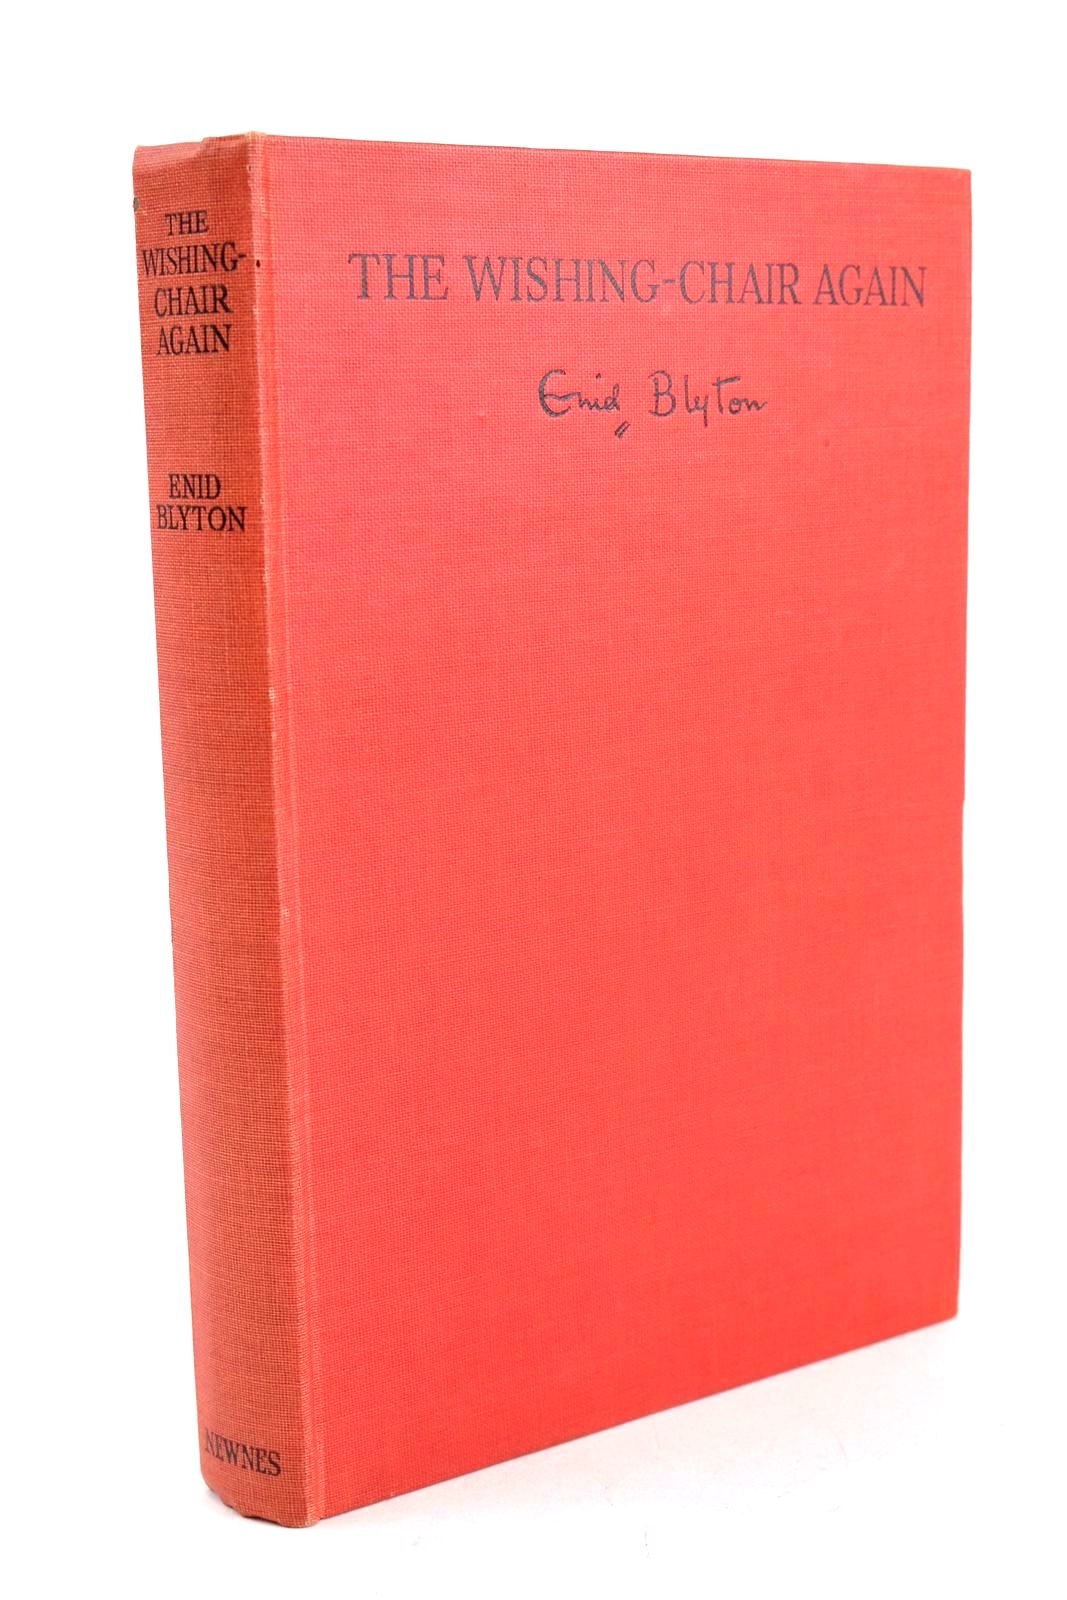 Photo of THE WISHING-CHAIR AGAIN written by Blyton, Enid illustrated by McGavin, Hilda published by George Newnes Ltd. (STOCK CODE: 1326758)  for sale by Stella & Rose's Books